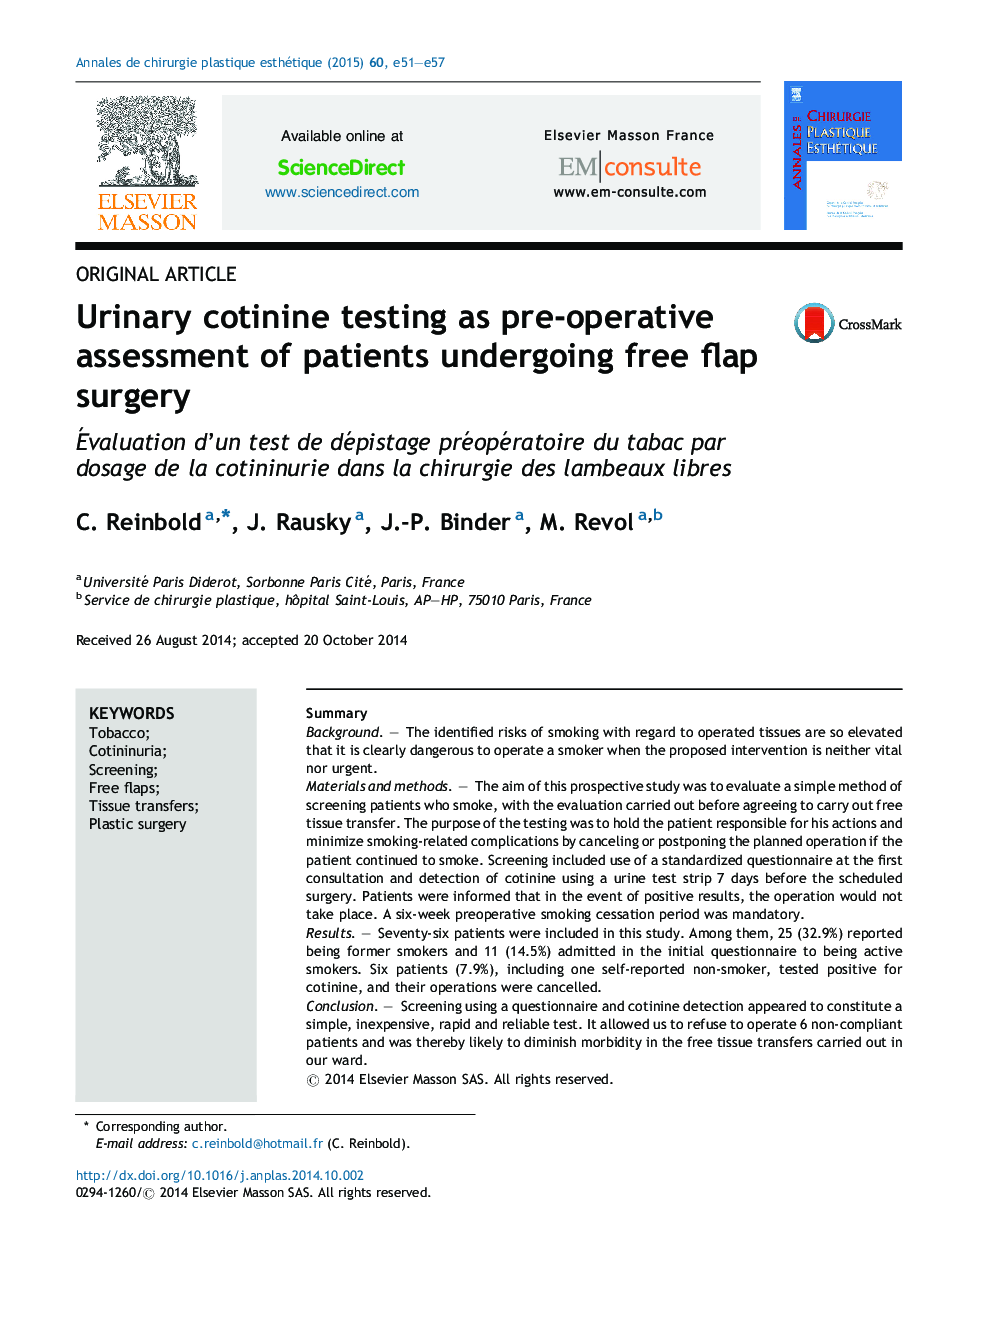 Urinary cotinine testing as pre-operative assessment of patients undergoing free flap surgery